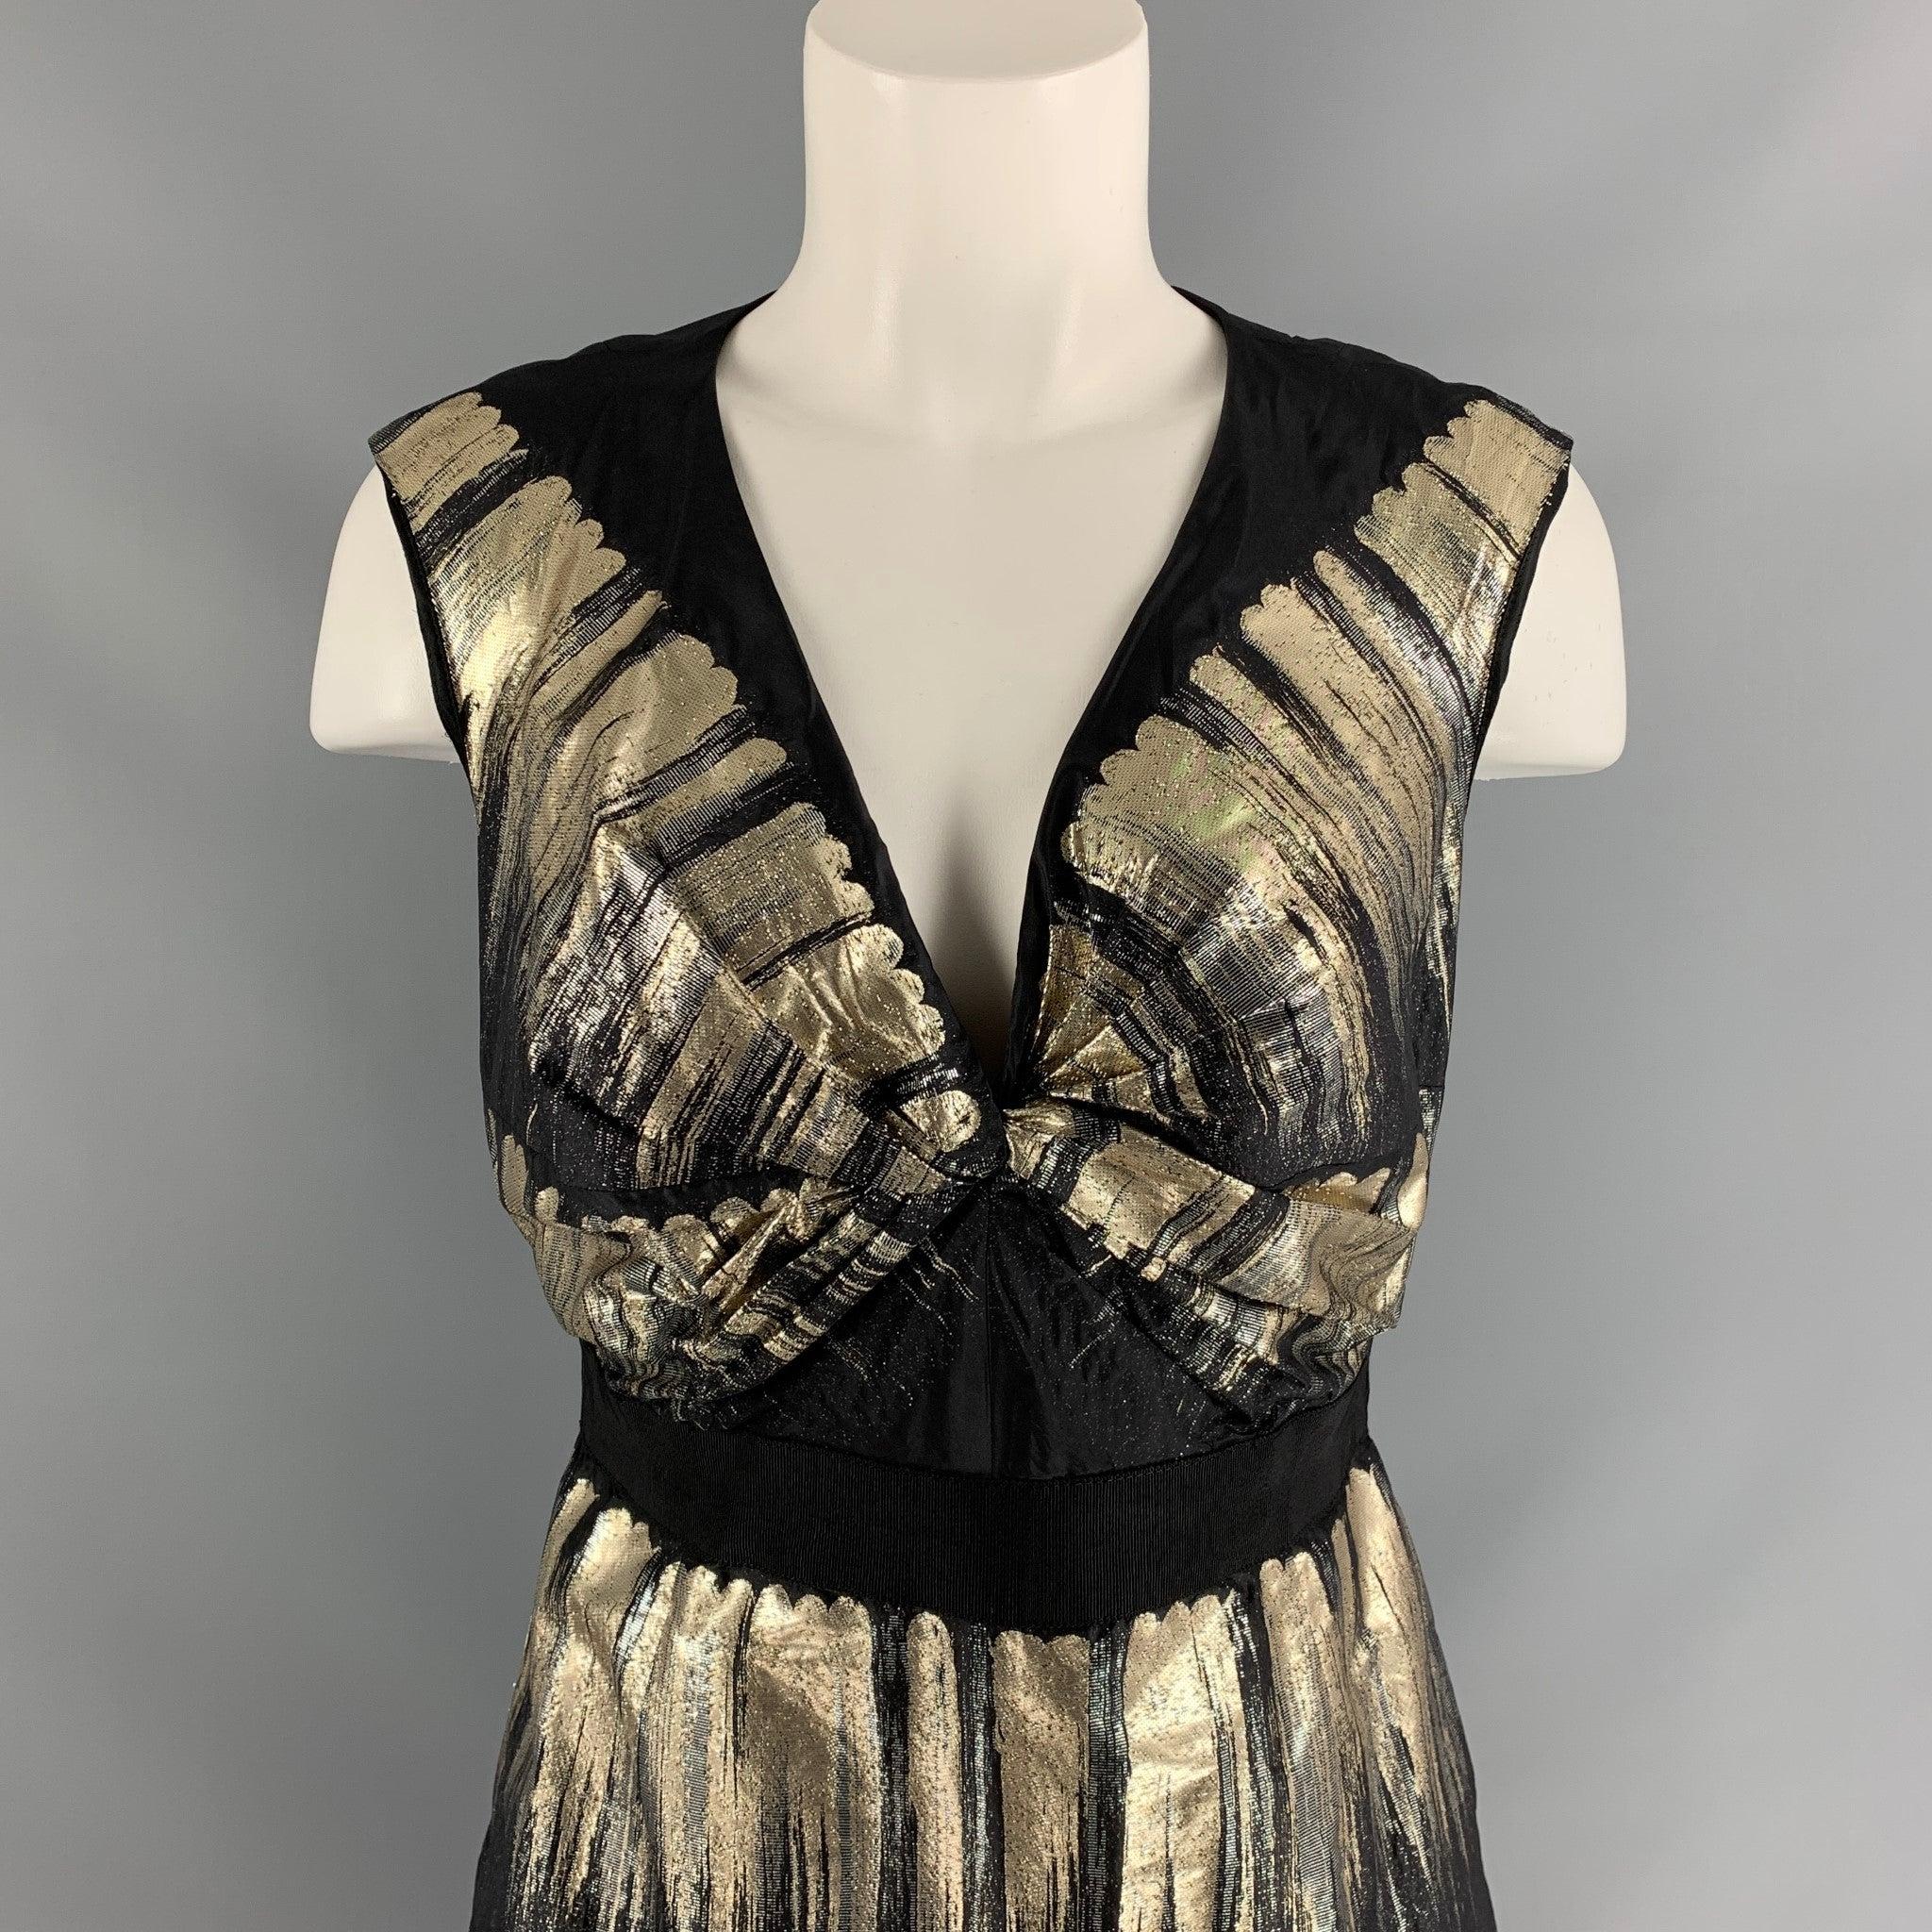 PORTS 1961 bodycon sleeveless, cocktail dress comes in black, gold and silver taffeta, full lined and half invisible zipper at center back featuring ruched detail at front. Excellent Pre-Owned Condition. Fabric tag removed. 

Marked:  4